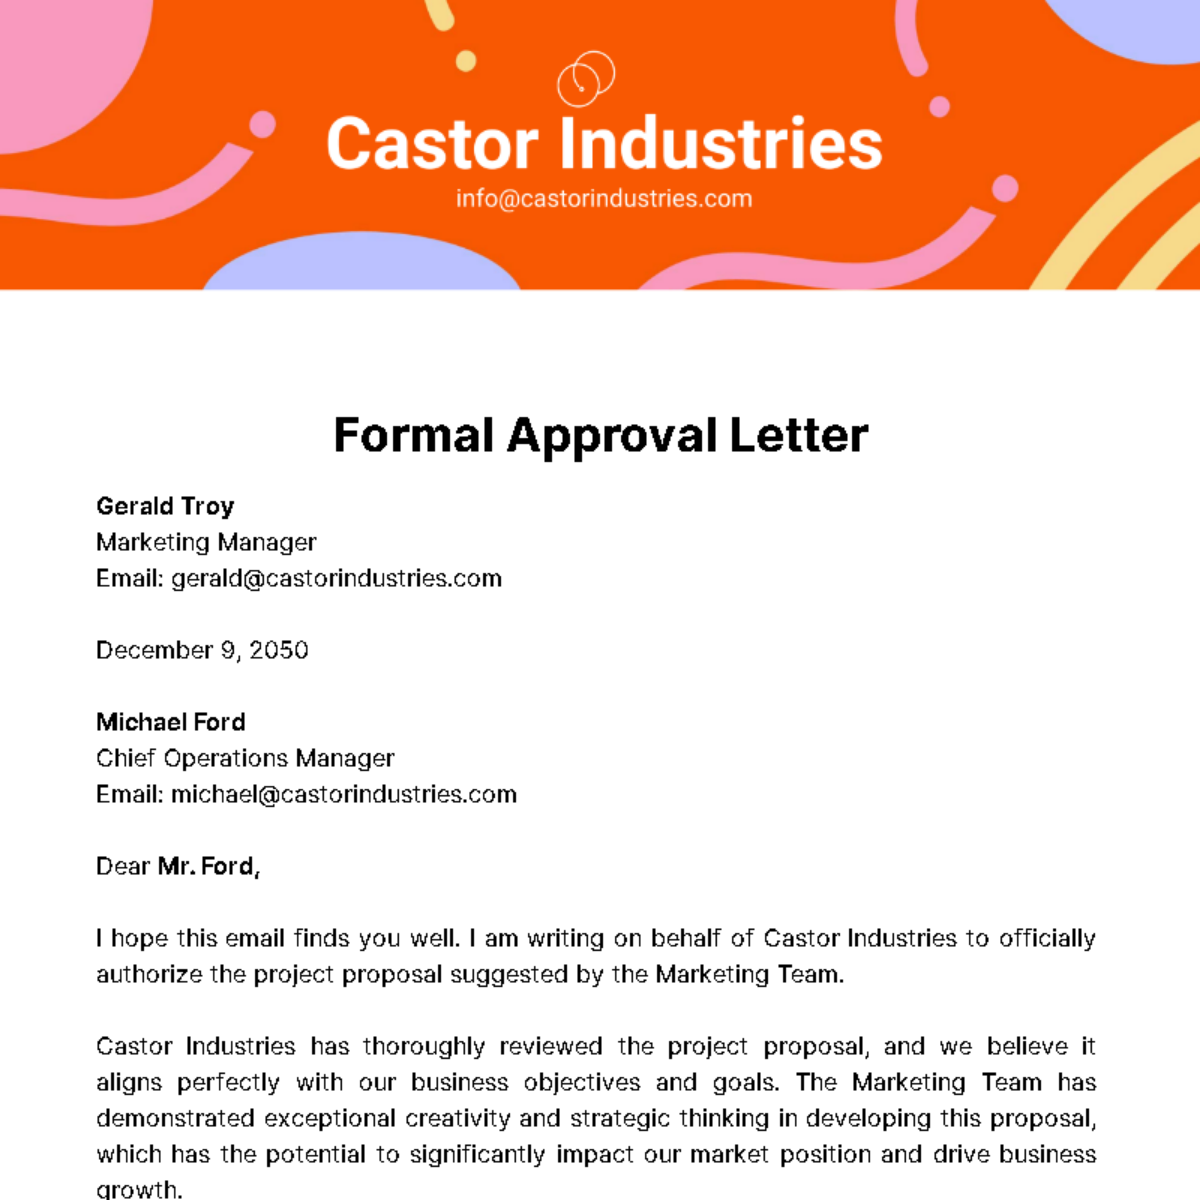 Formal Approval Letter  Template